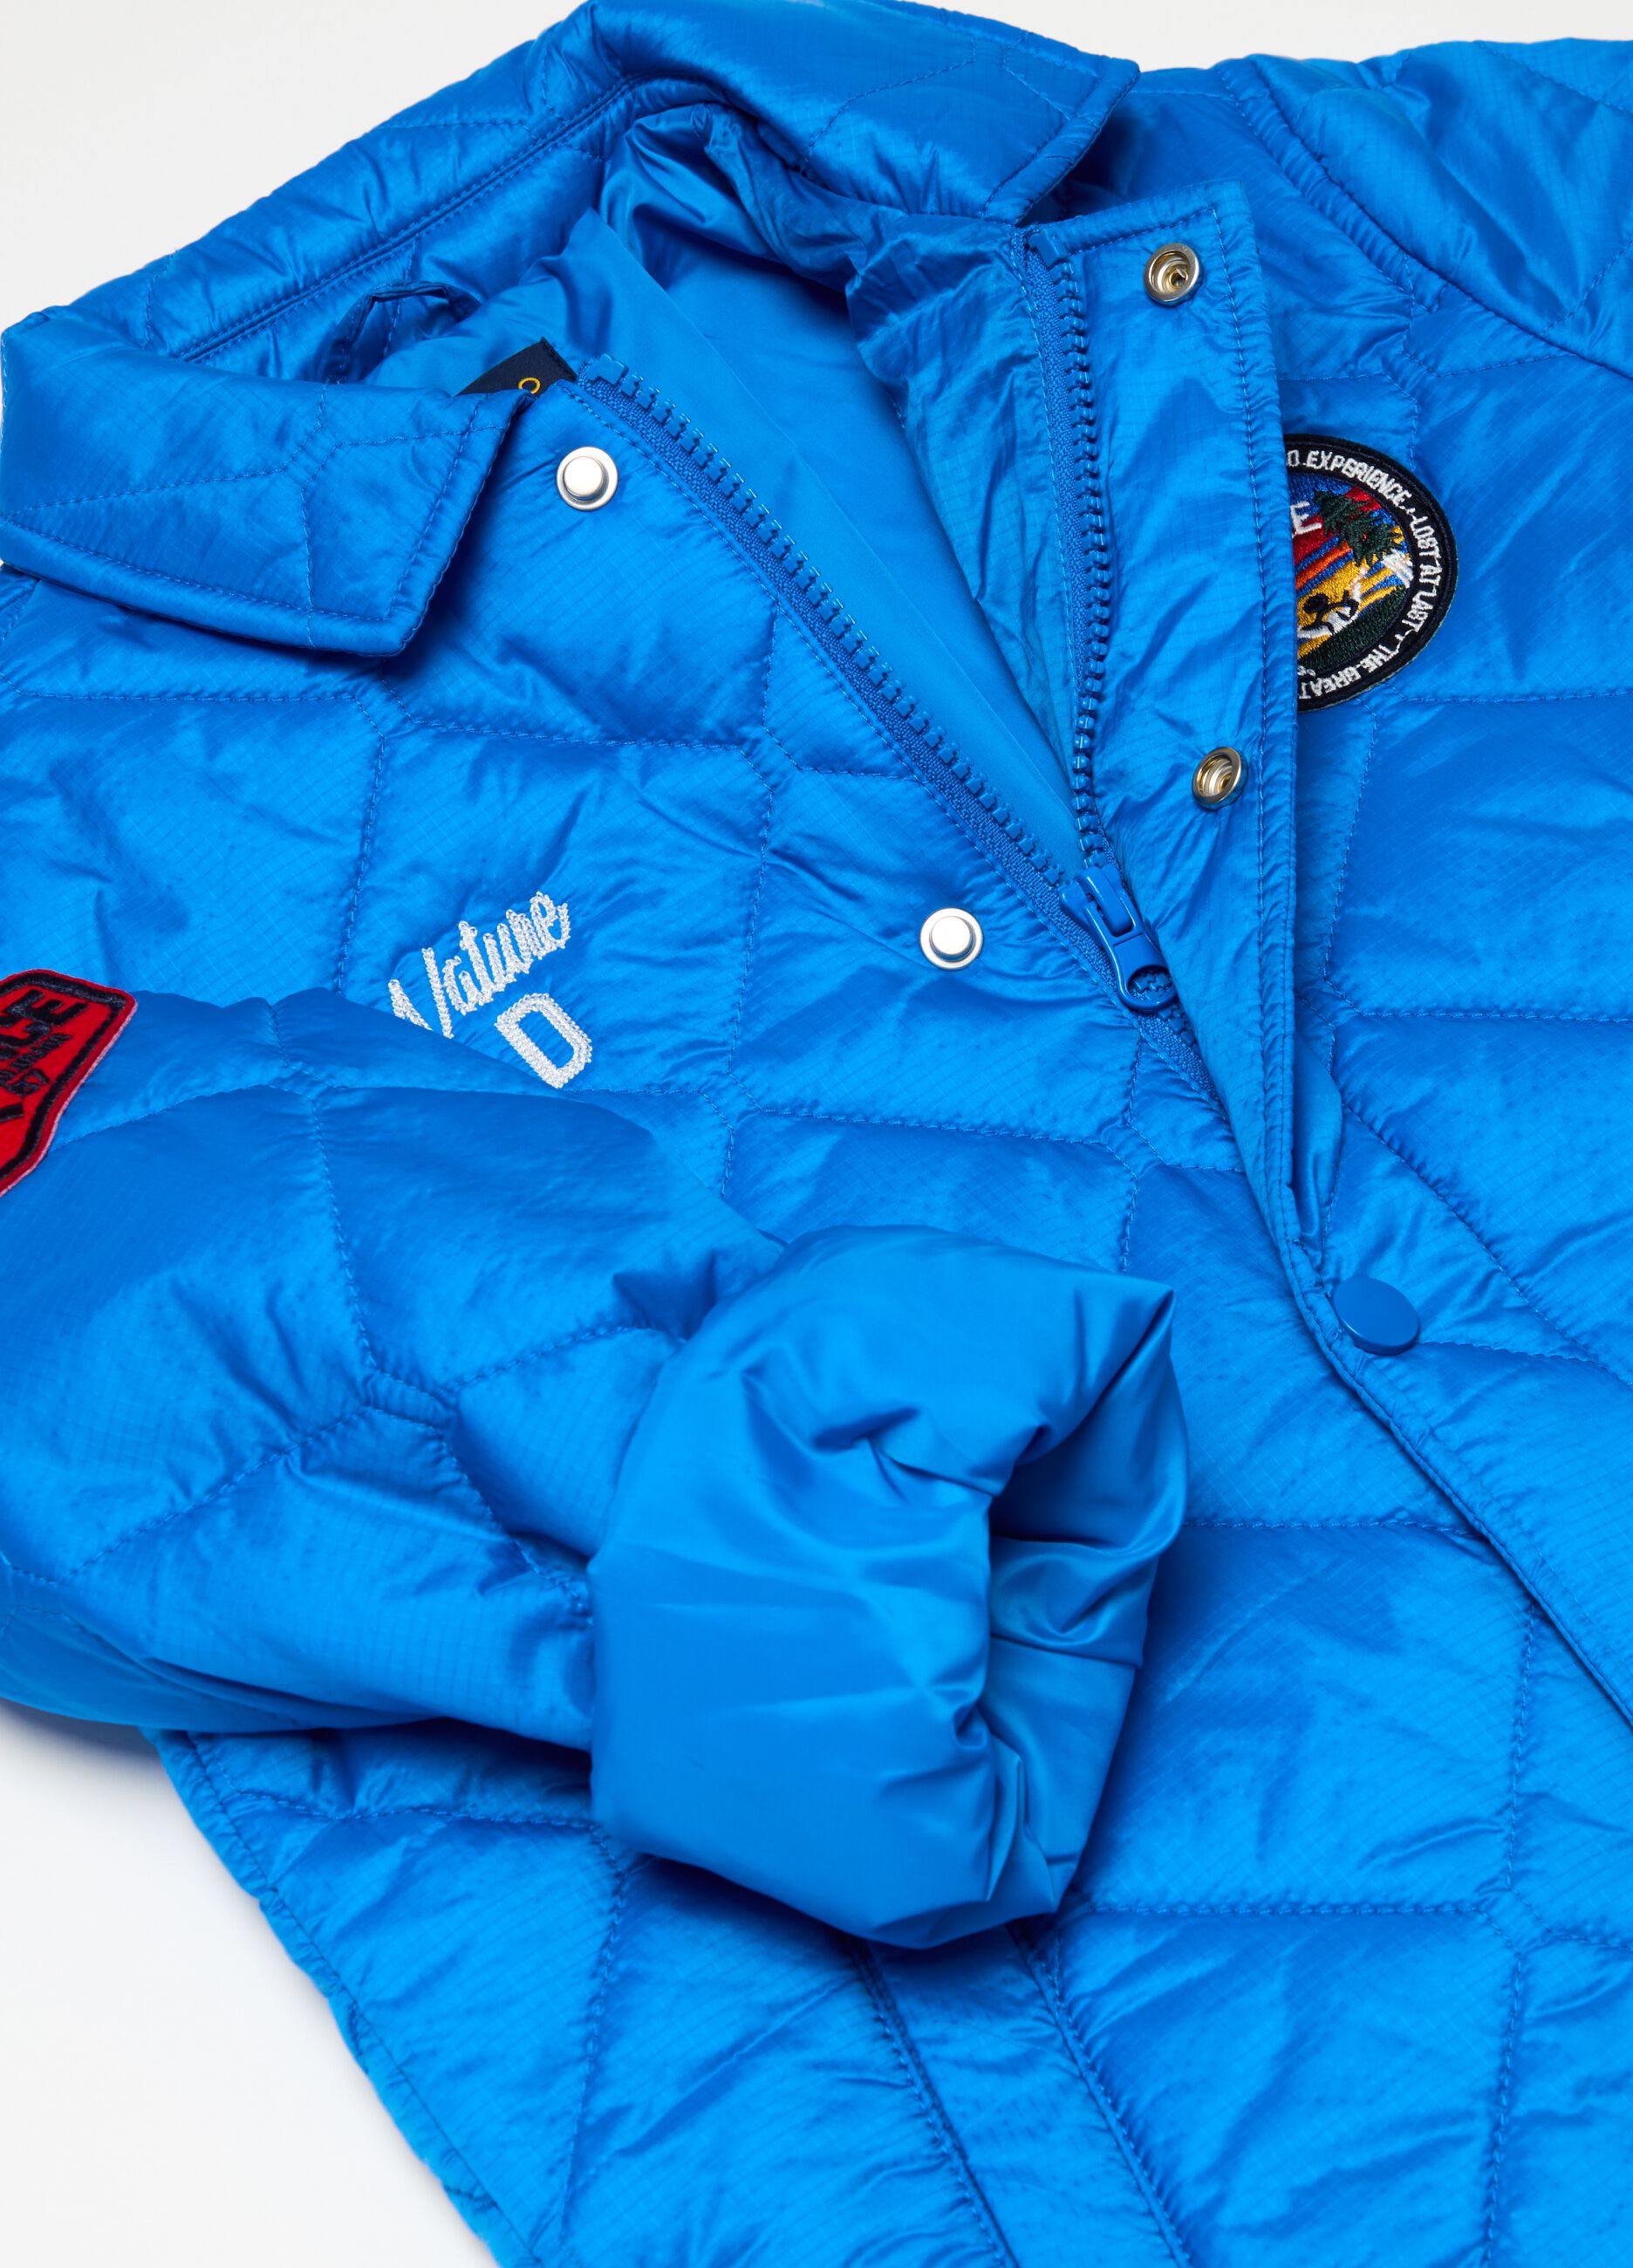 Quilted jacket with patches